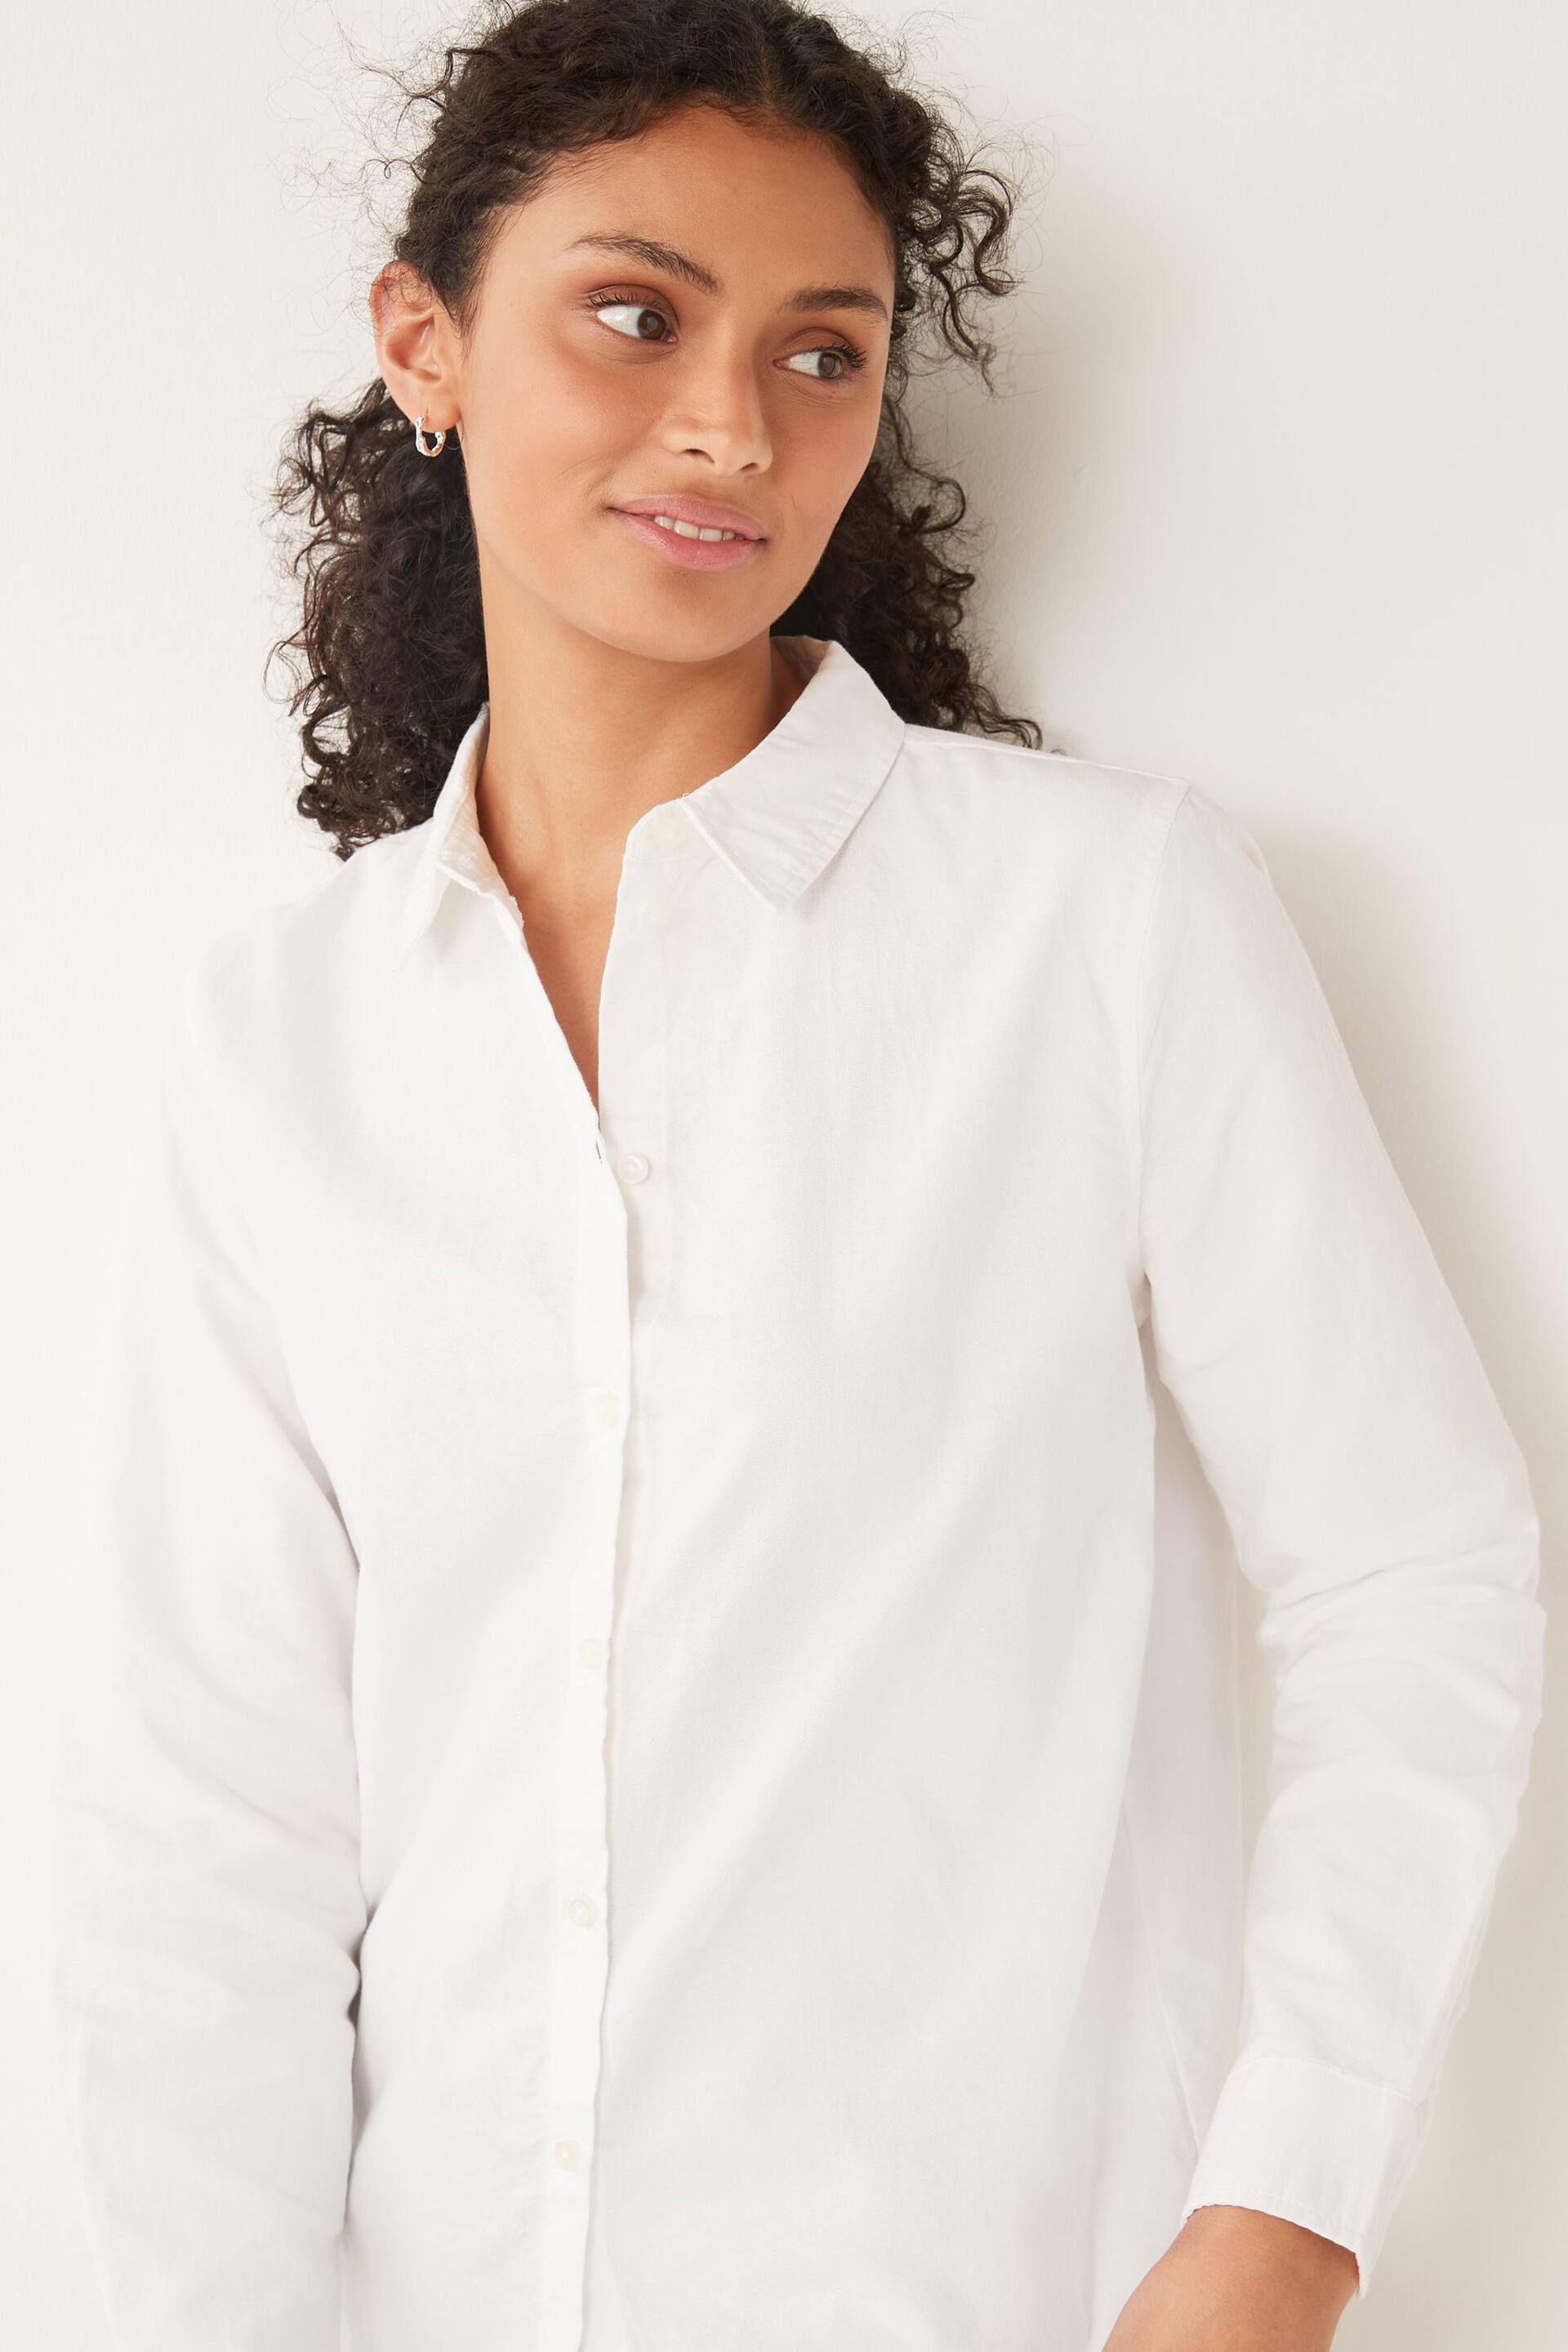 Pieces White Classic Oxford Workwear Shirt - Image 3 of 5